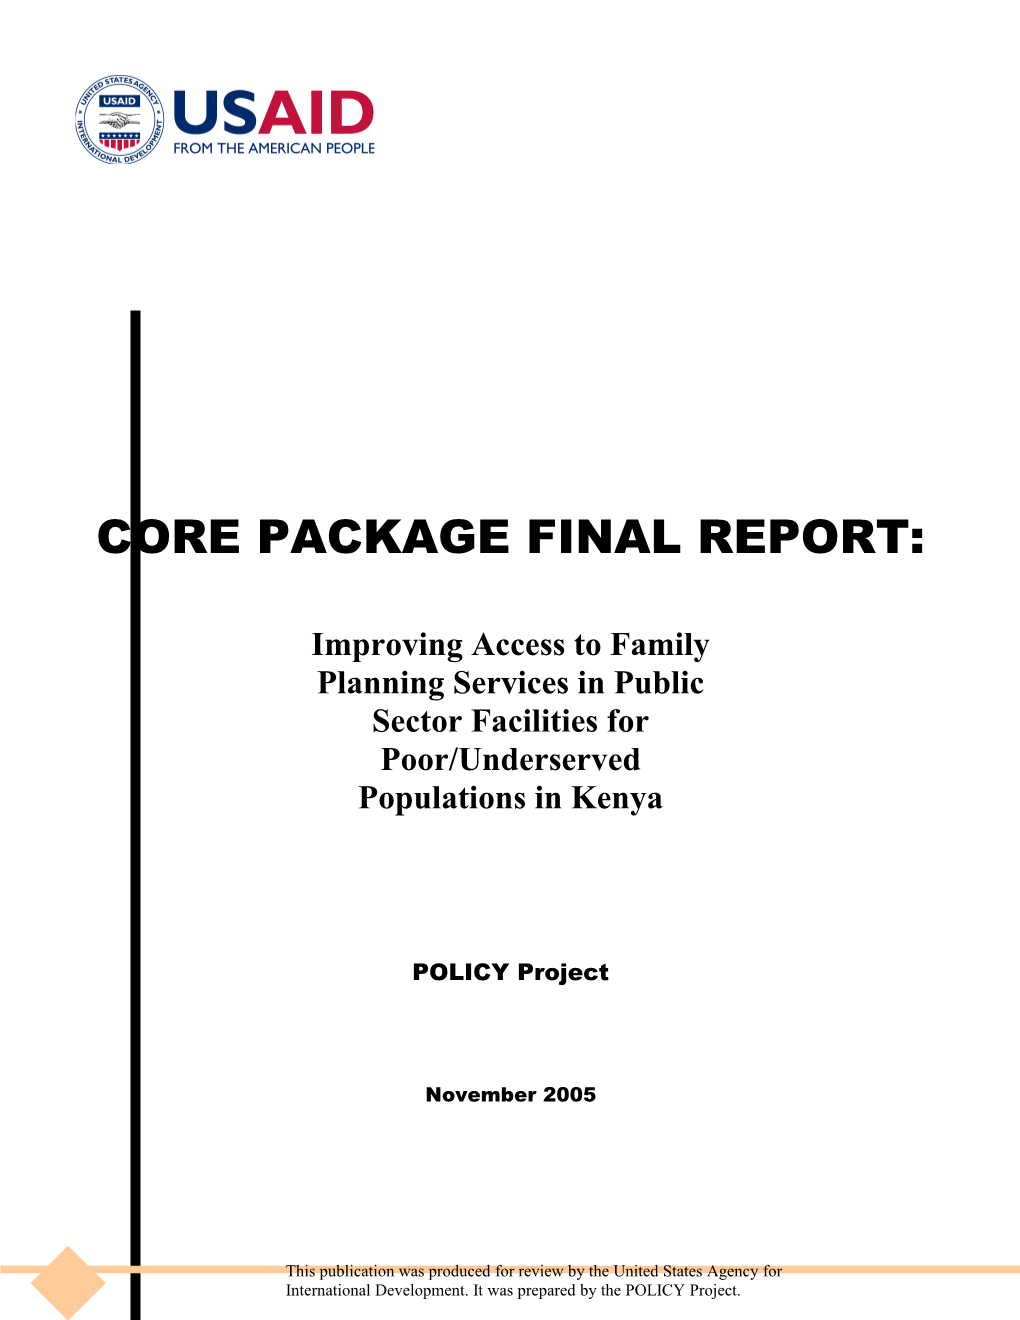 Core Package Final Report